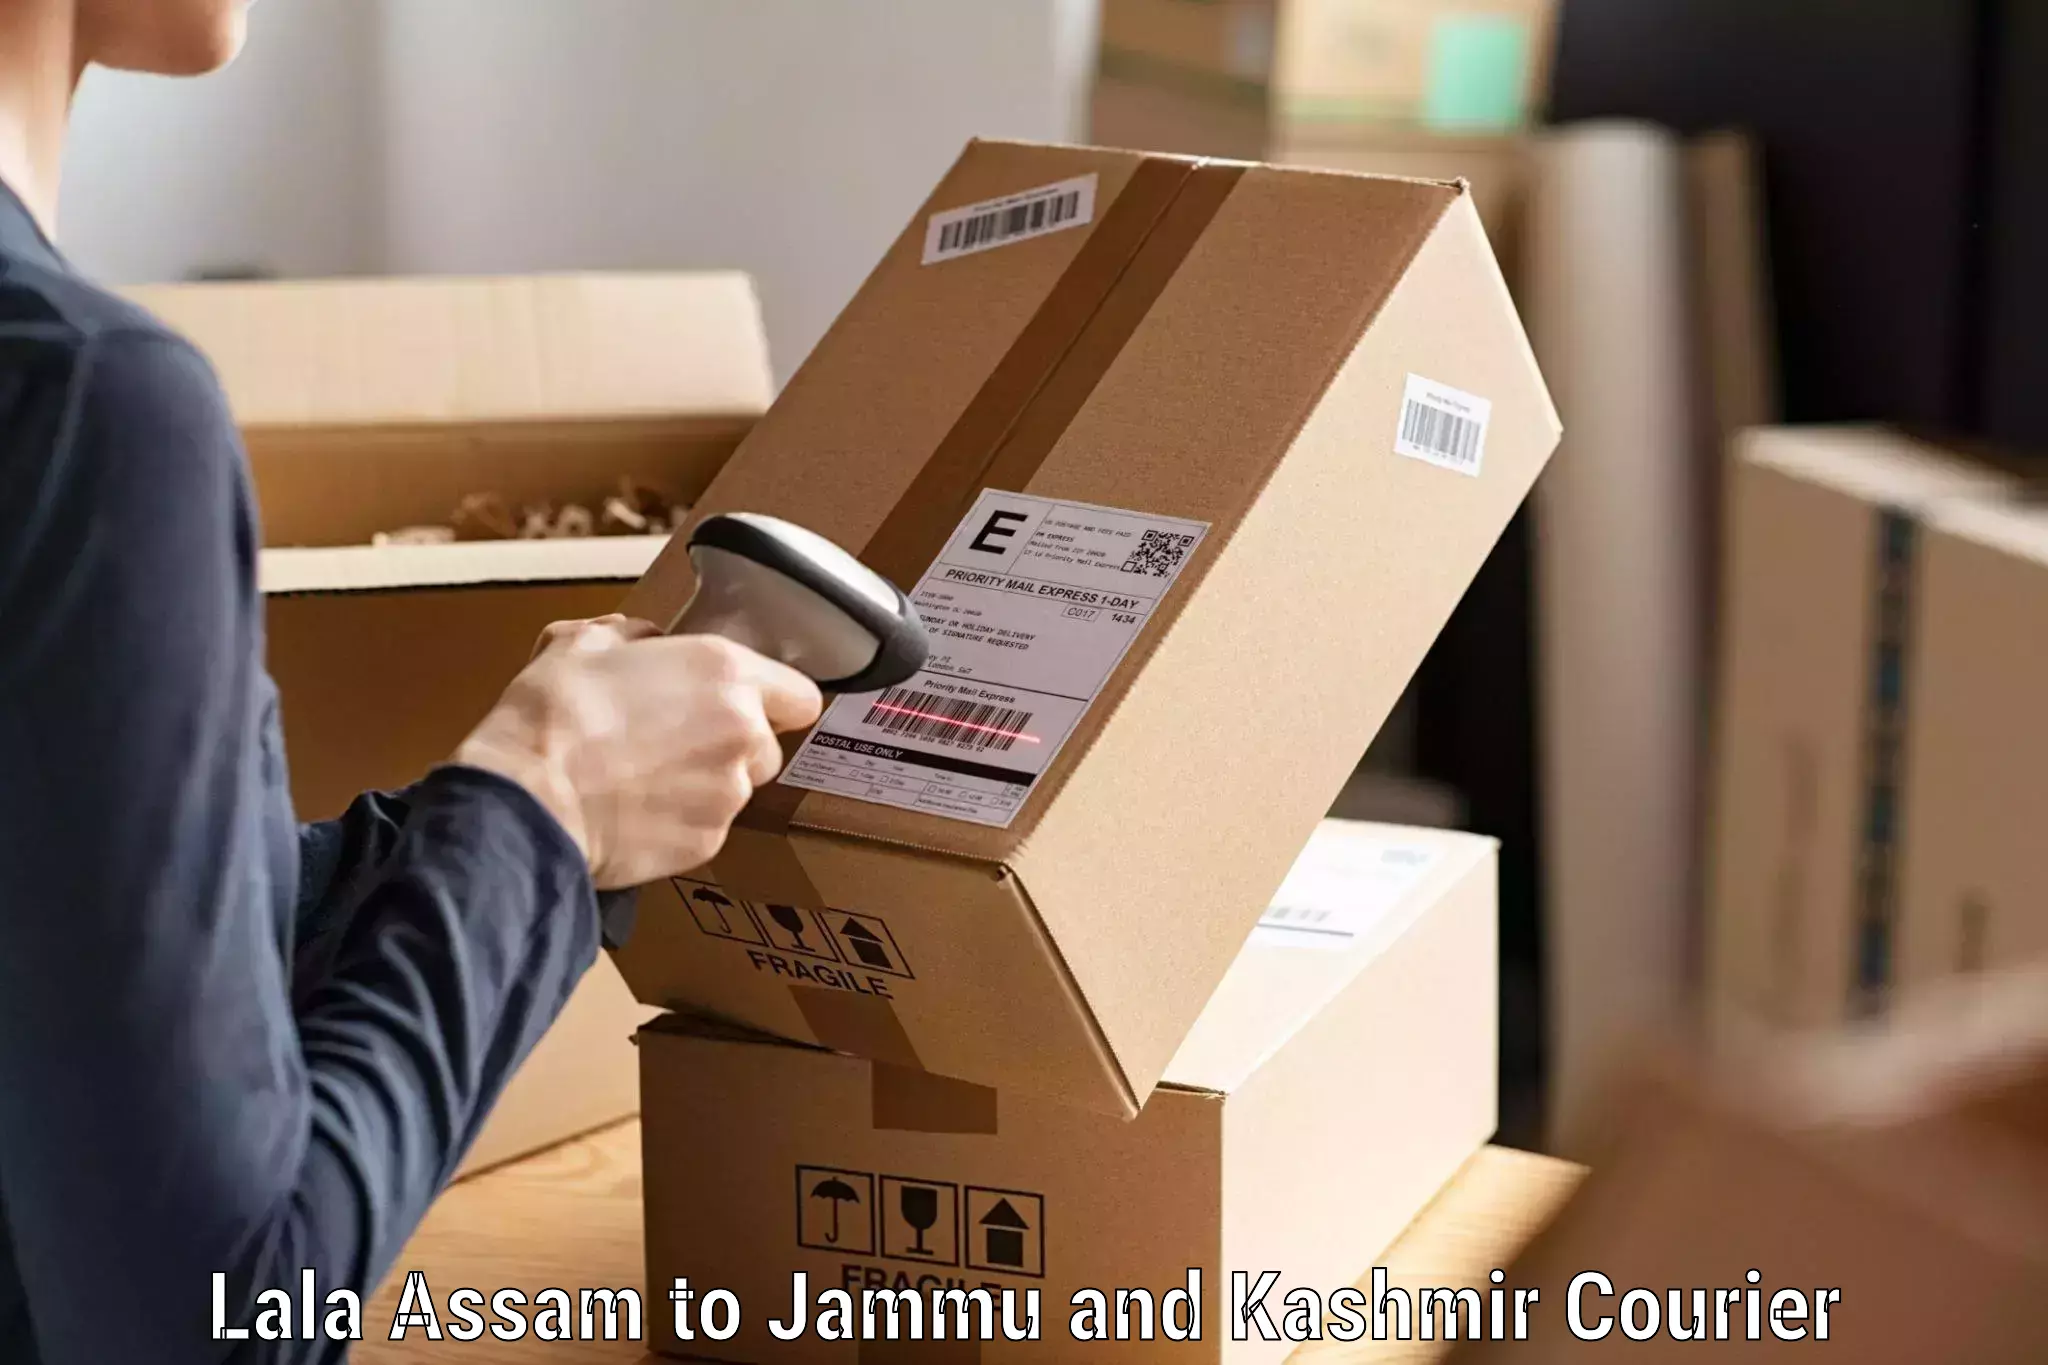 Reliable courier service in Lala Assam to Ramban